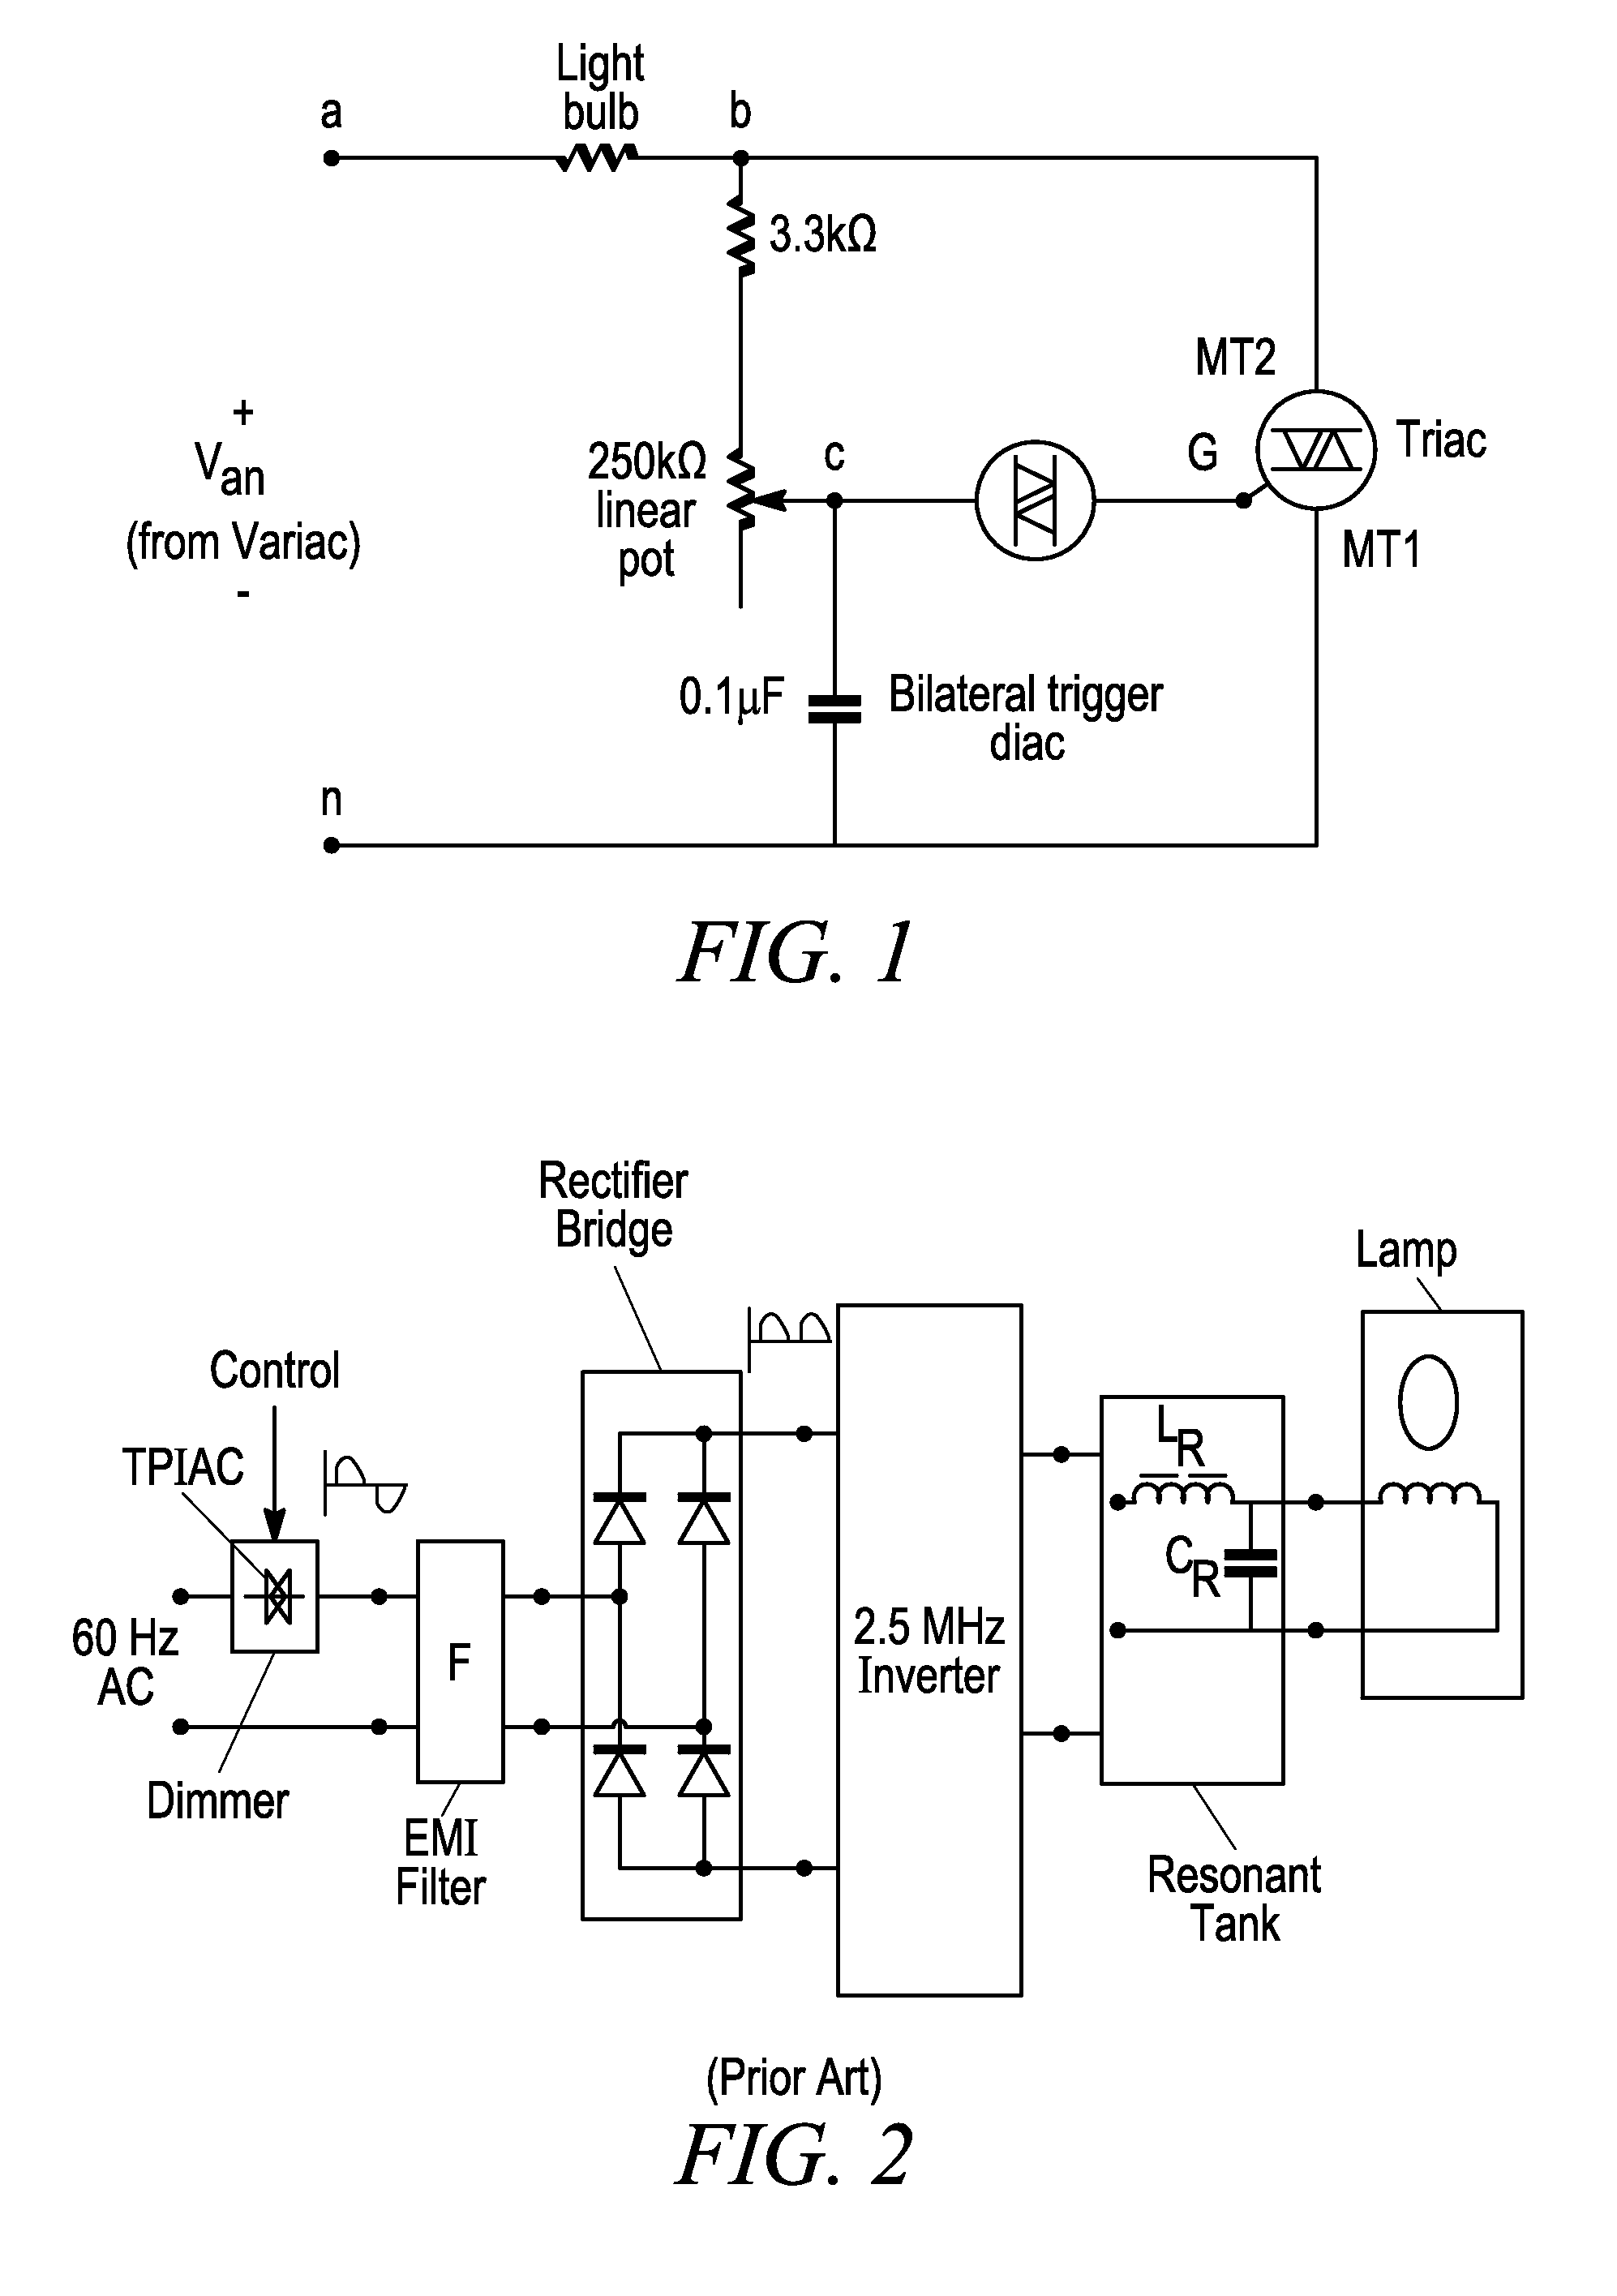 Arrangements and methods for triac dimming of gas discharge lamps powered by electronic ballasts